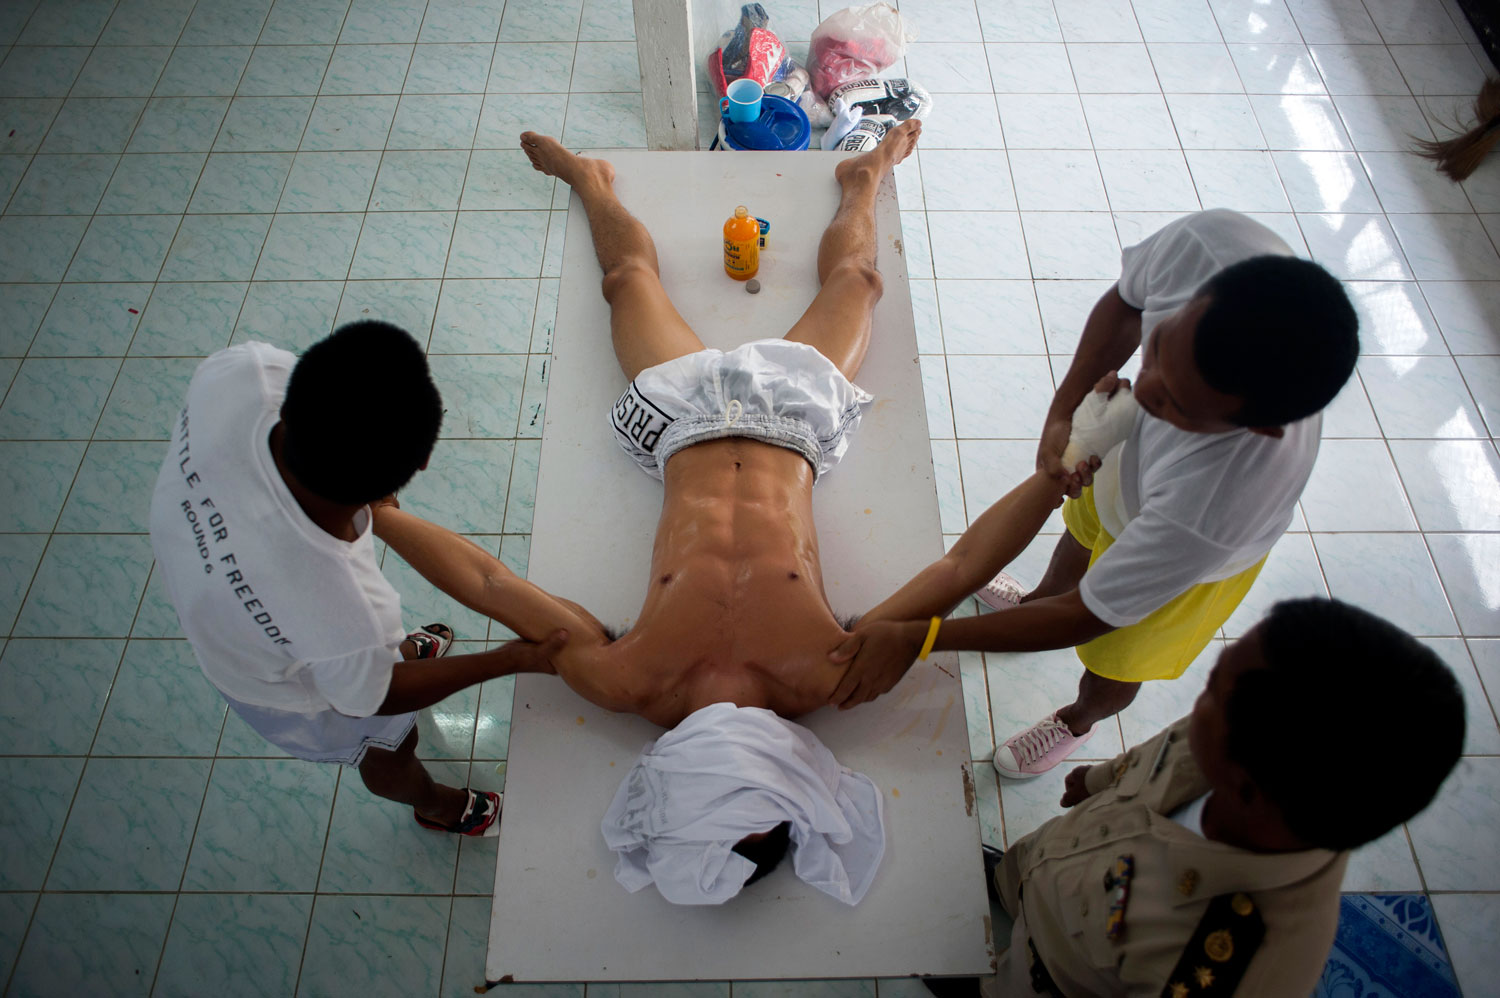 Assistants carry out a massage on an inmate before his fight as a prison officer stands by at Klong Pai prison on July 12, 2014 in Nakhon Ratchasima, Thailand.